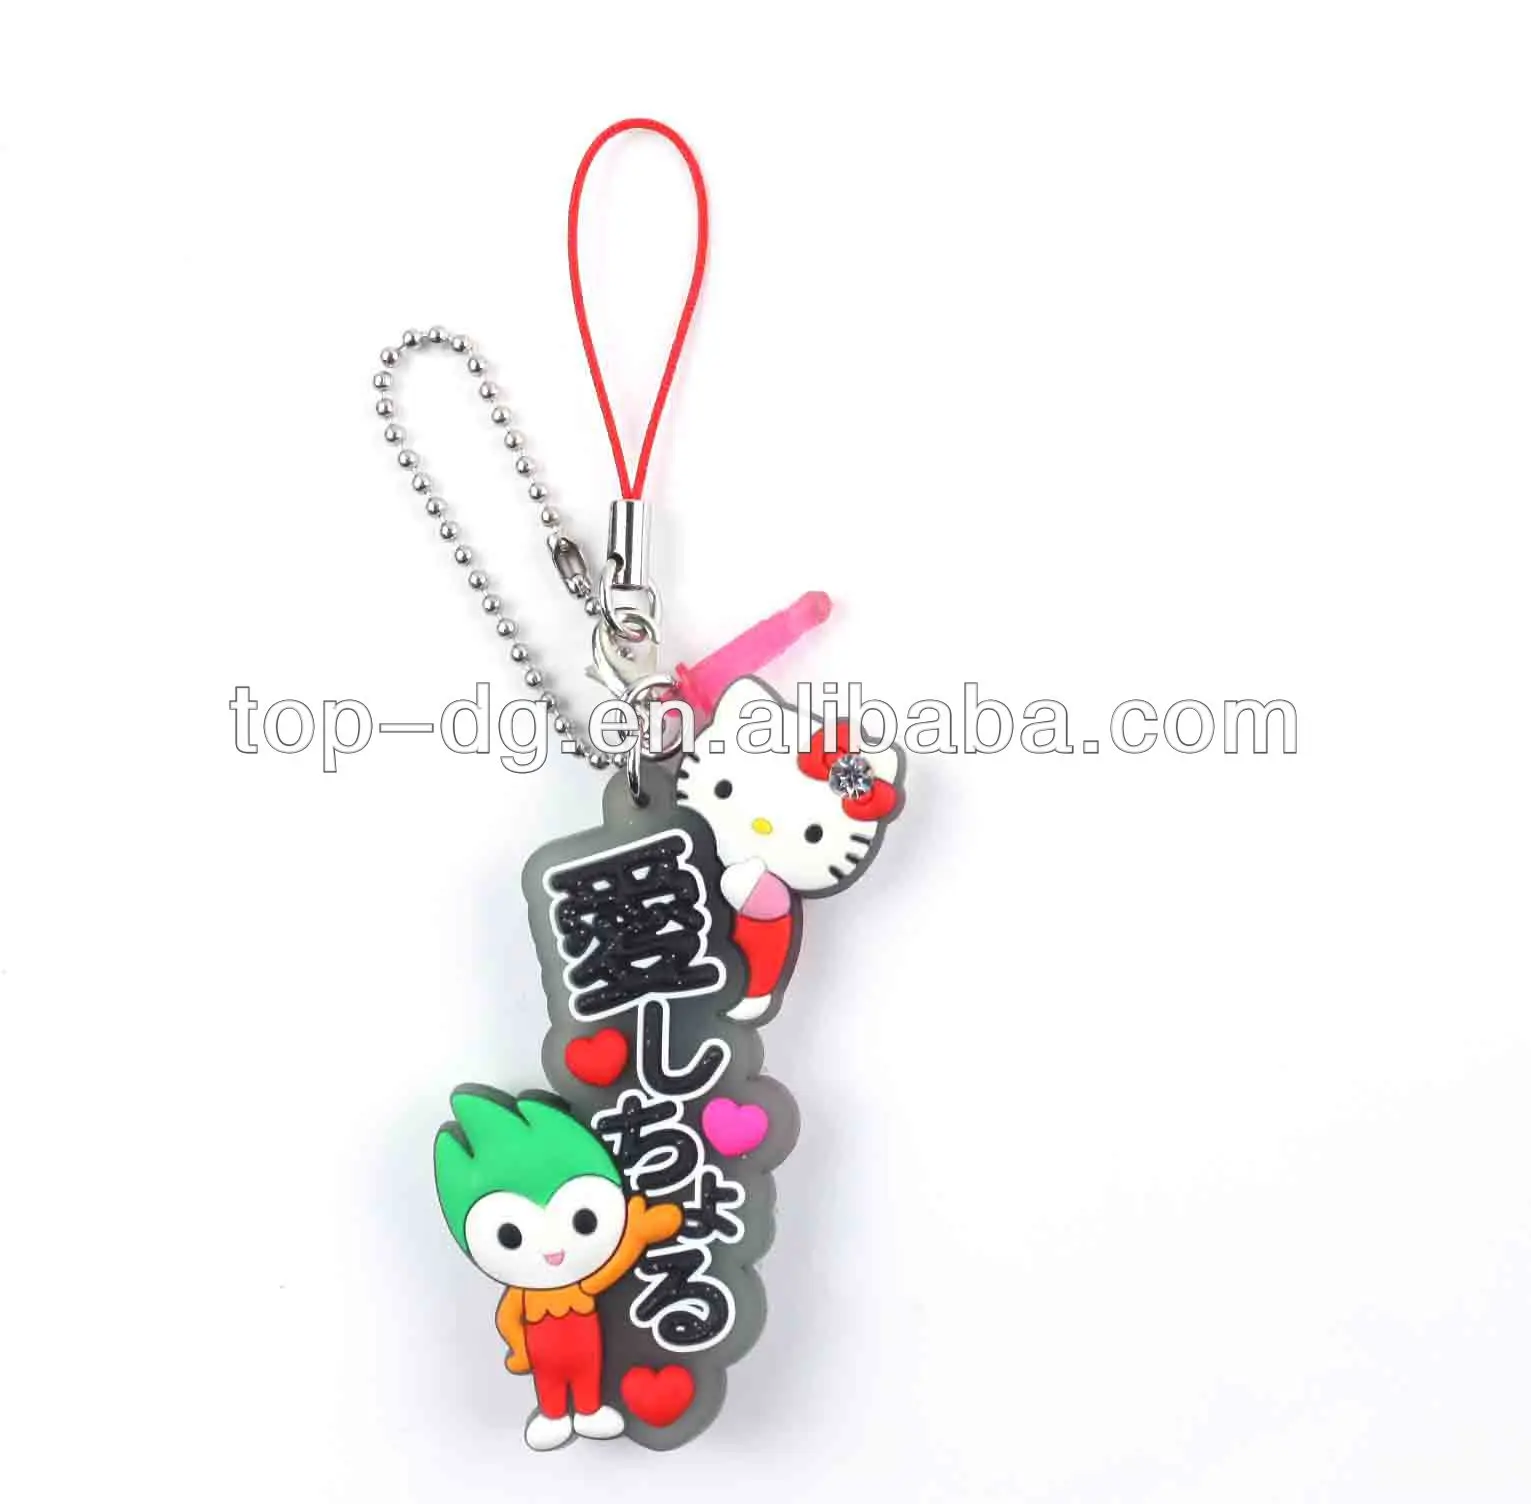 HELLO KITTY LAS VEGAS PEN W/CHARM AND CELL PHONE CHARM STRAP/BOXES